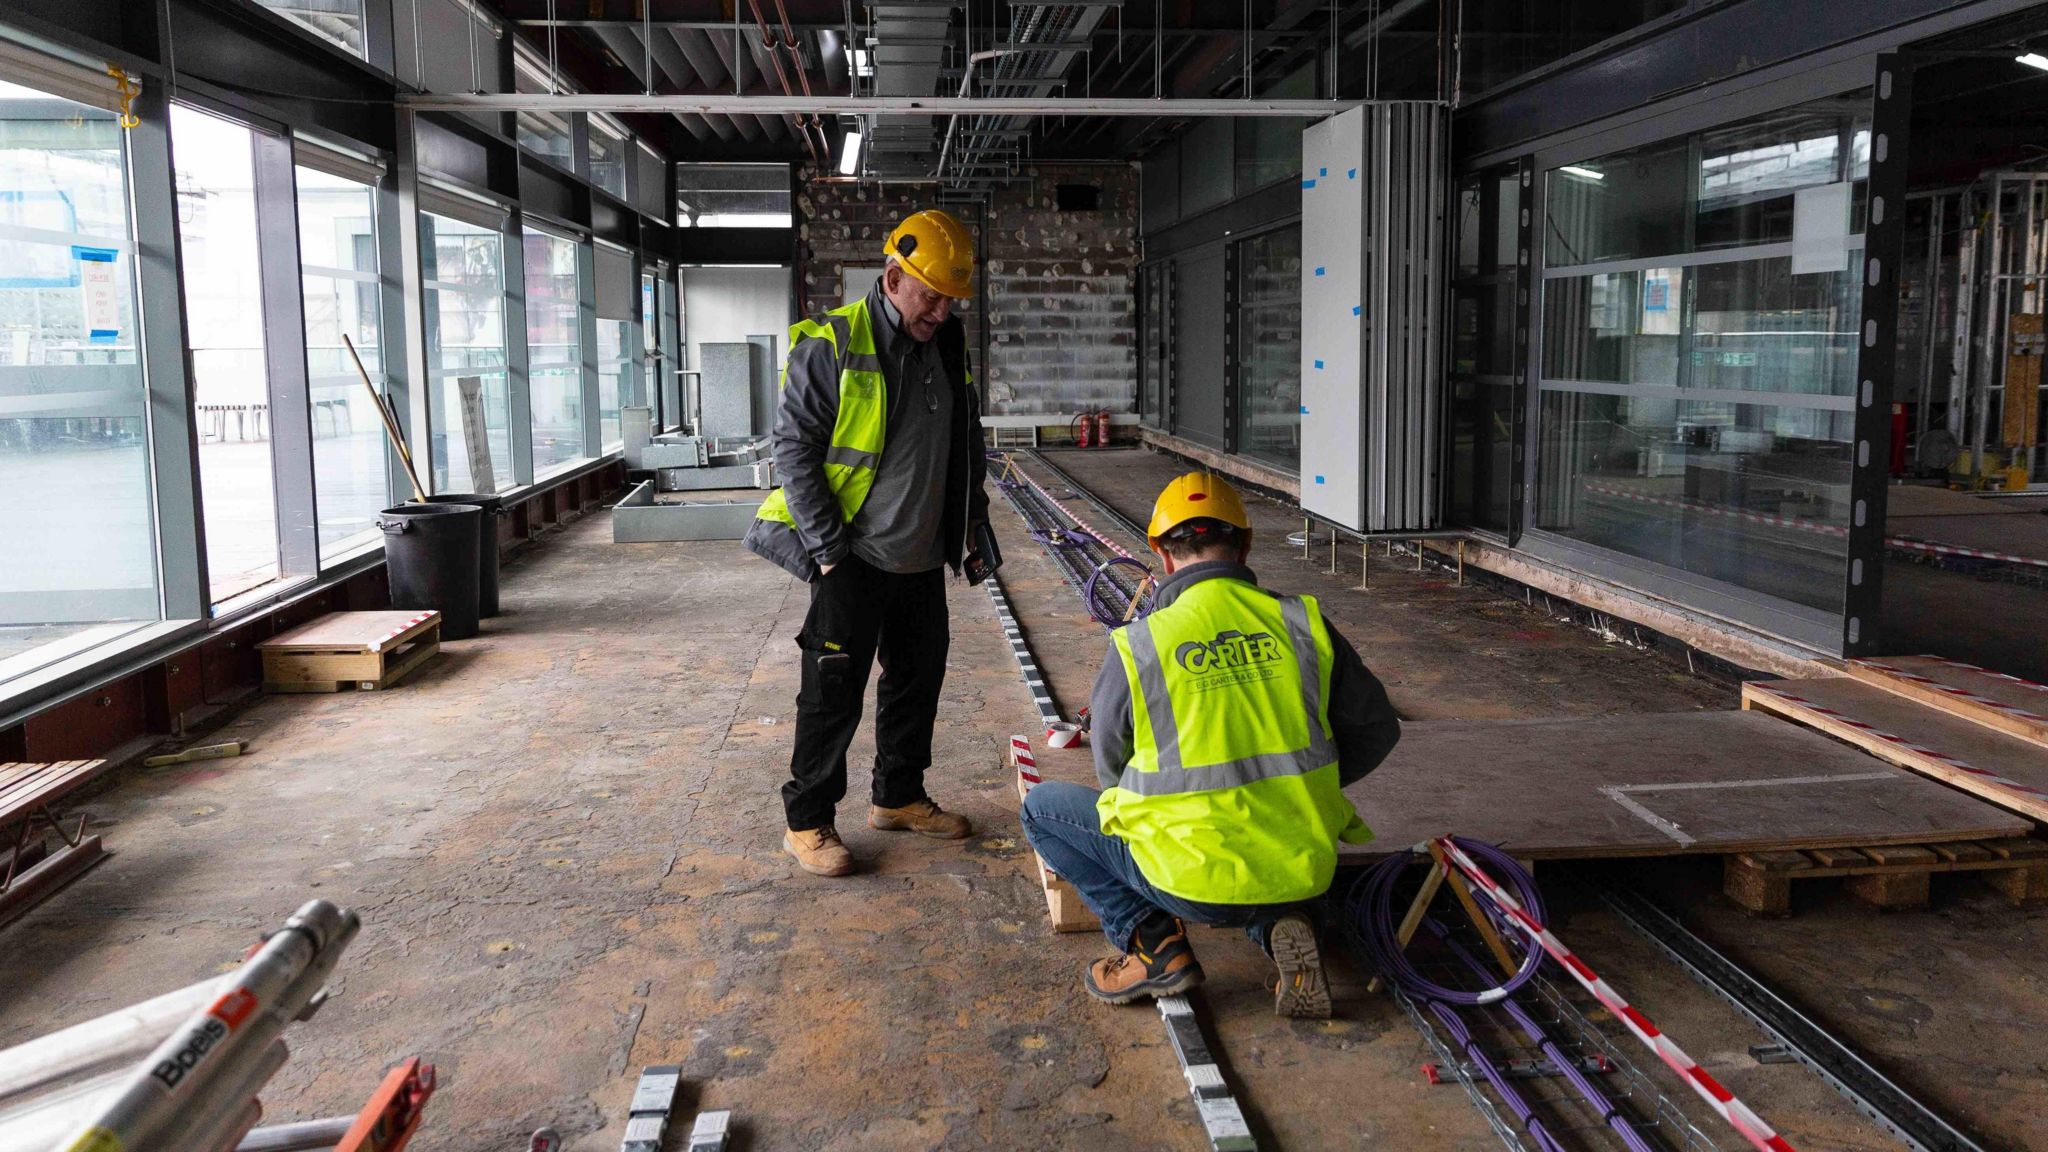 Workmen in high-viz jackets inside a building site with tools and fittings around them